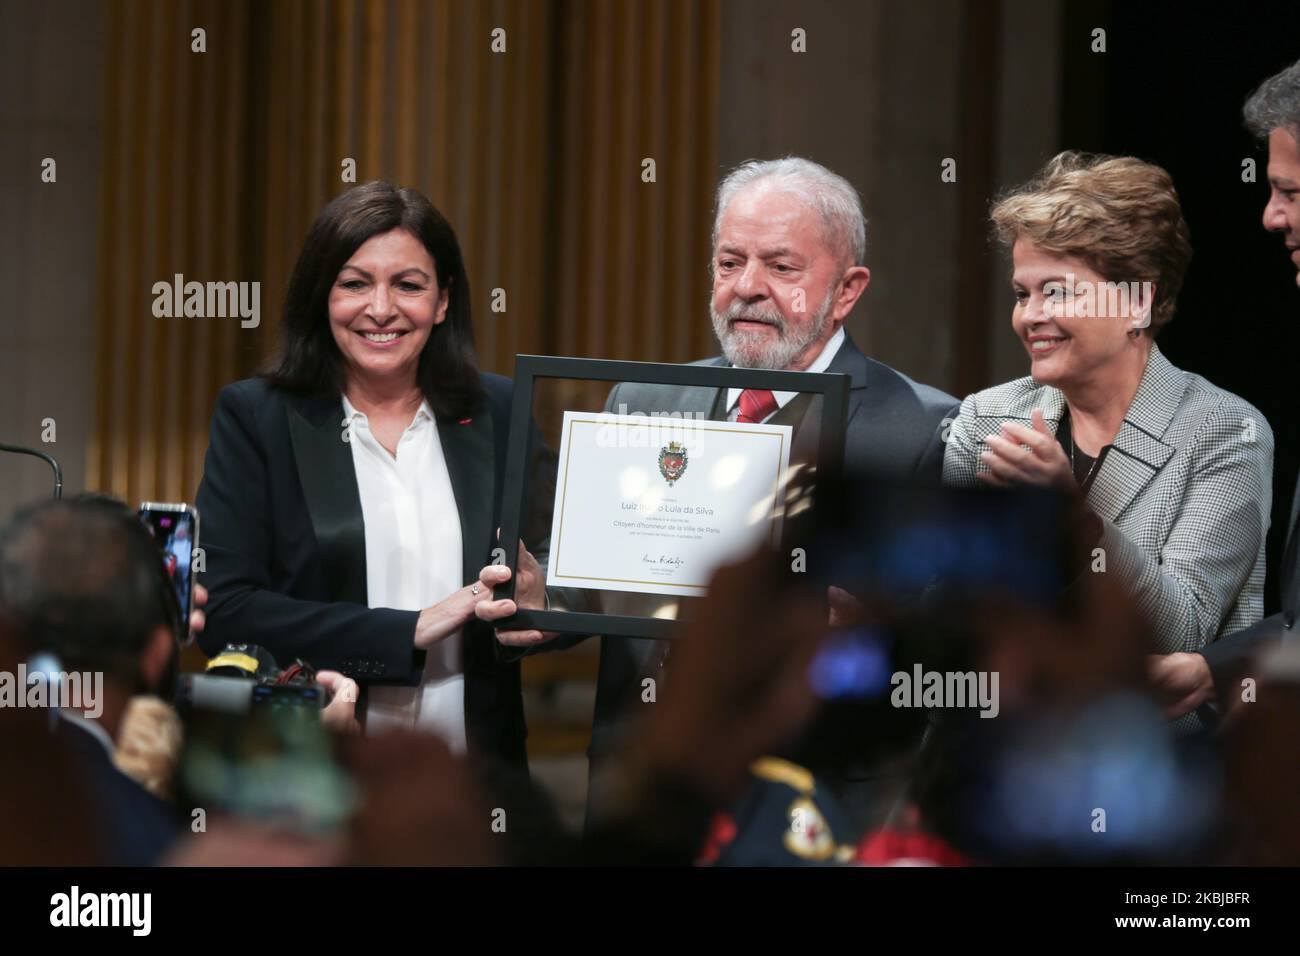 Former Brazilian president Luiz Inacio Lula da Silva (C) flanked by Paris Mayor and candidate for re-election Anne Hidalgo (L) and Former Brazilian president Dilma Rousseff (R) is named honorary citizen of the city of Paris during a ceremony at the City Hall of Paris, on March 2, 2020. (Photo by Michel Stoupak/NurPhoto) Stock Photo